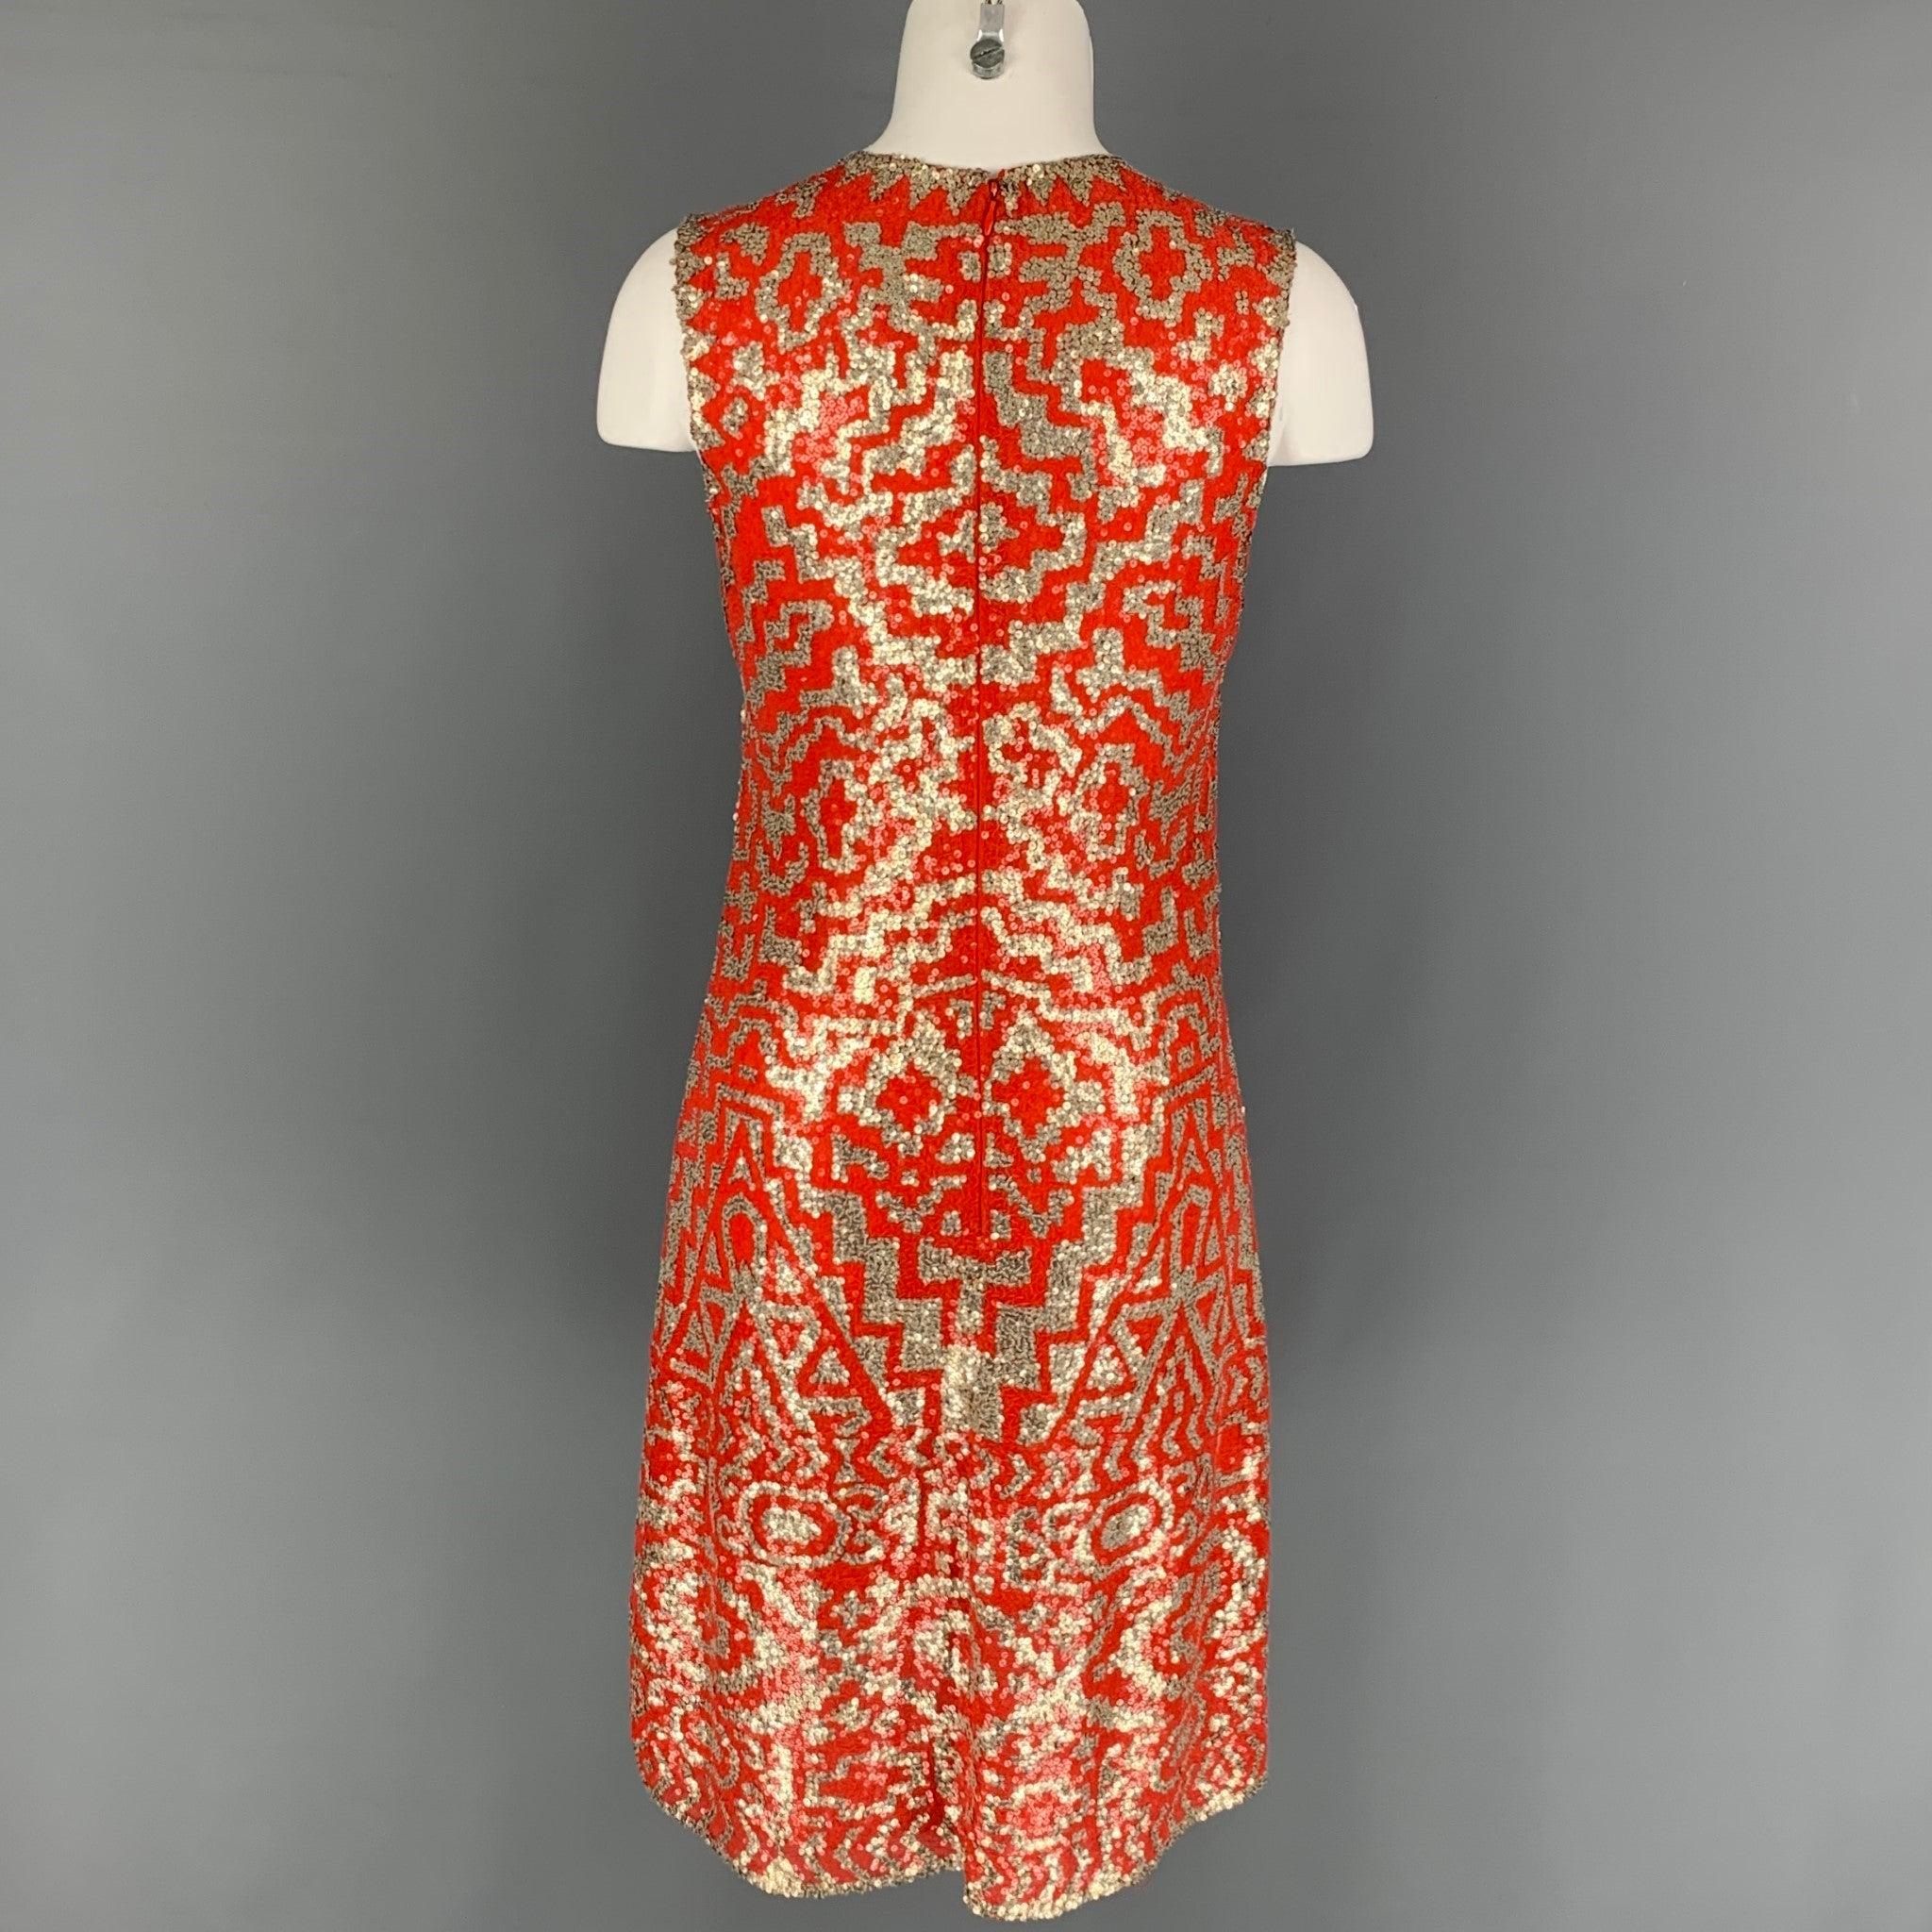 NAEEM KHAN Size M Orange Silver Geometric Sleeveless Cocktail Dress In Good Condition For Sale In San Francisco, CA